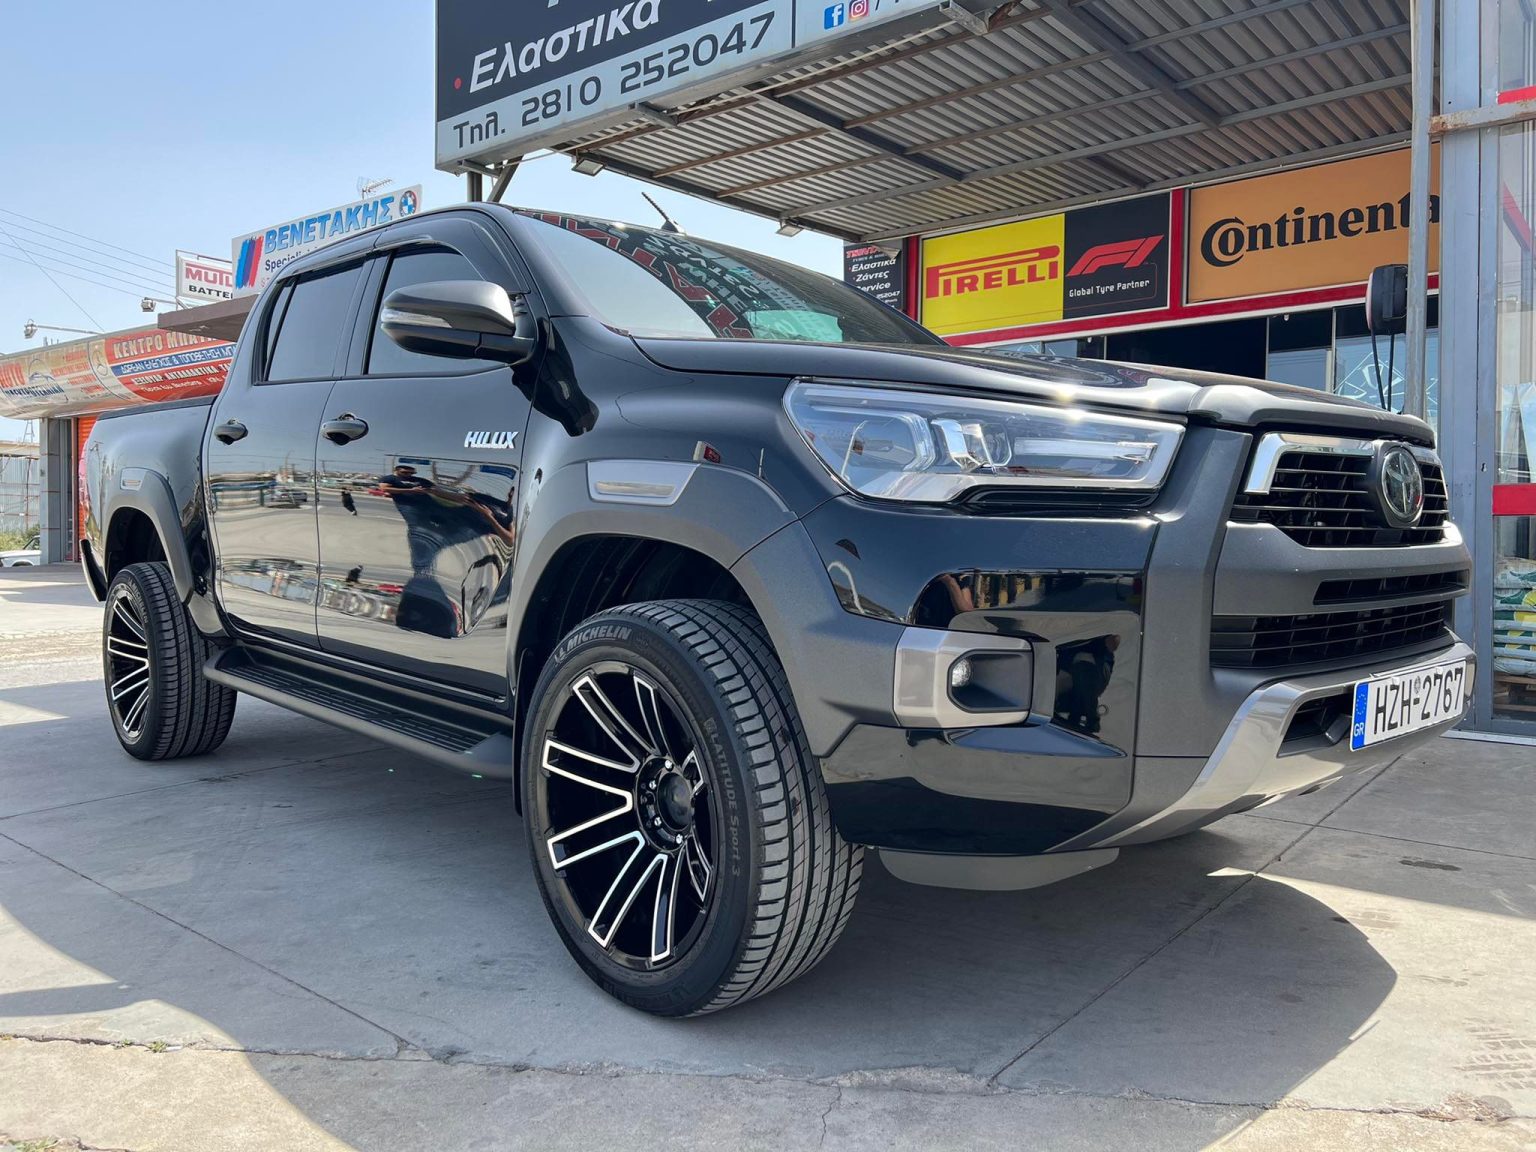 Time to shine ✨
Toyota Hilux με νέες 20’’ ζάντες & ελαστικά 275/45R20 110Y Michelin Latitude Sport 3